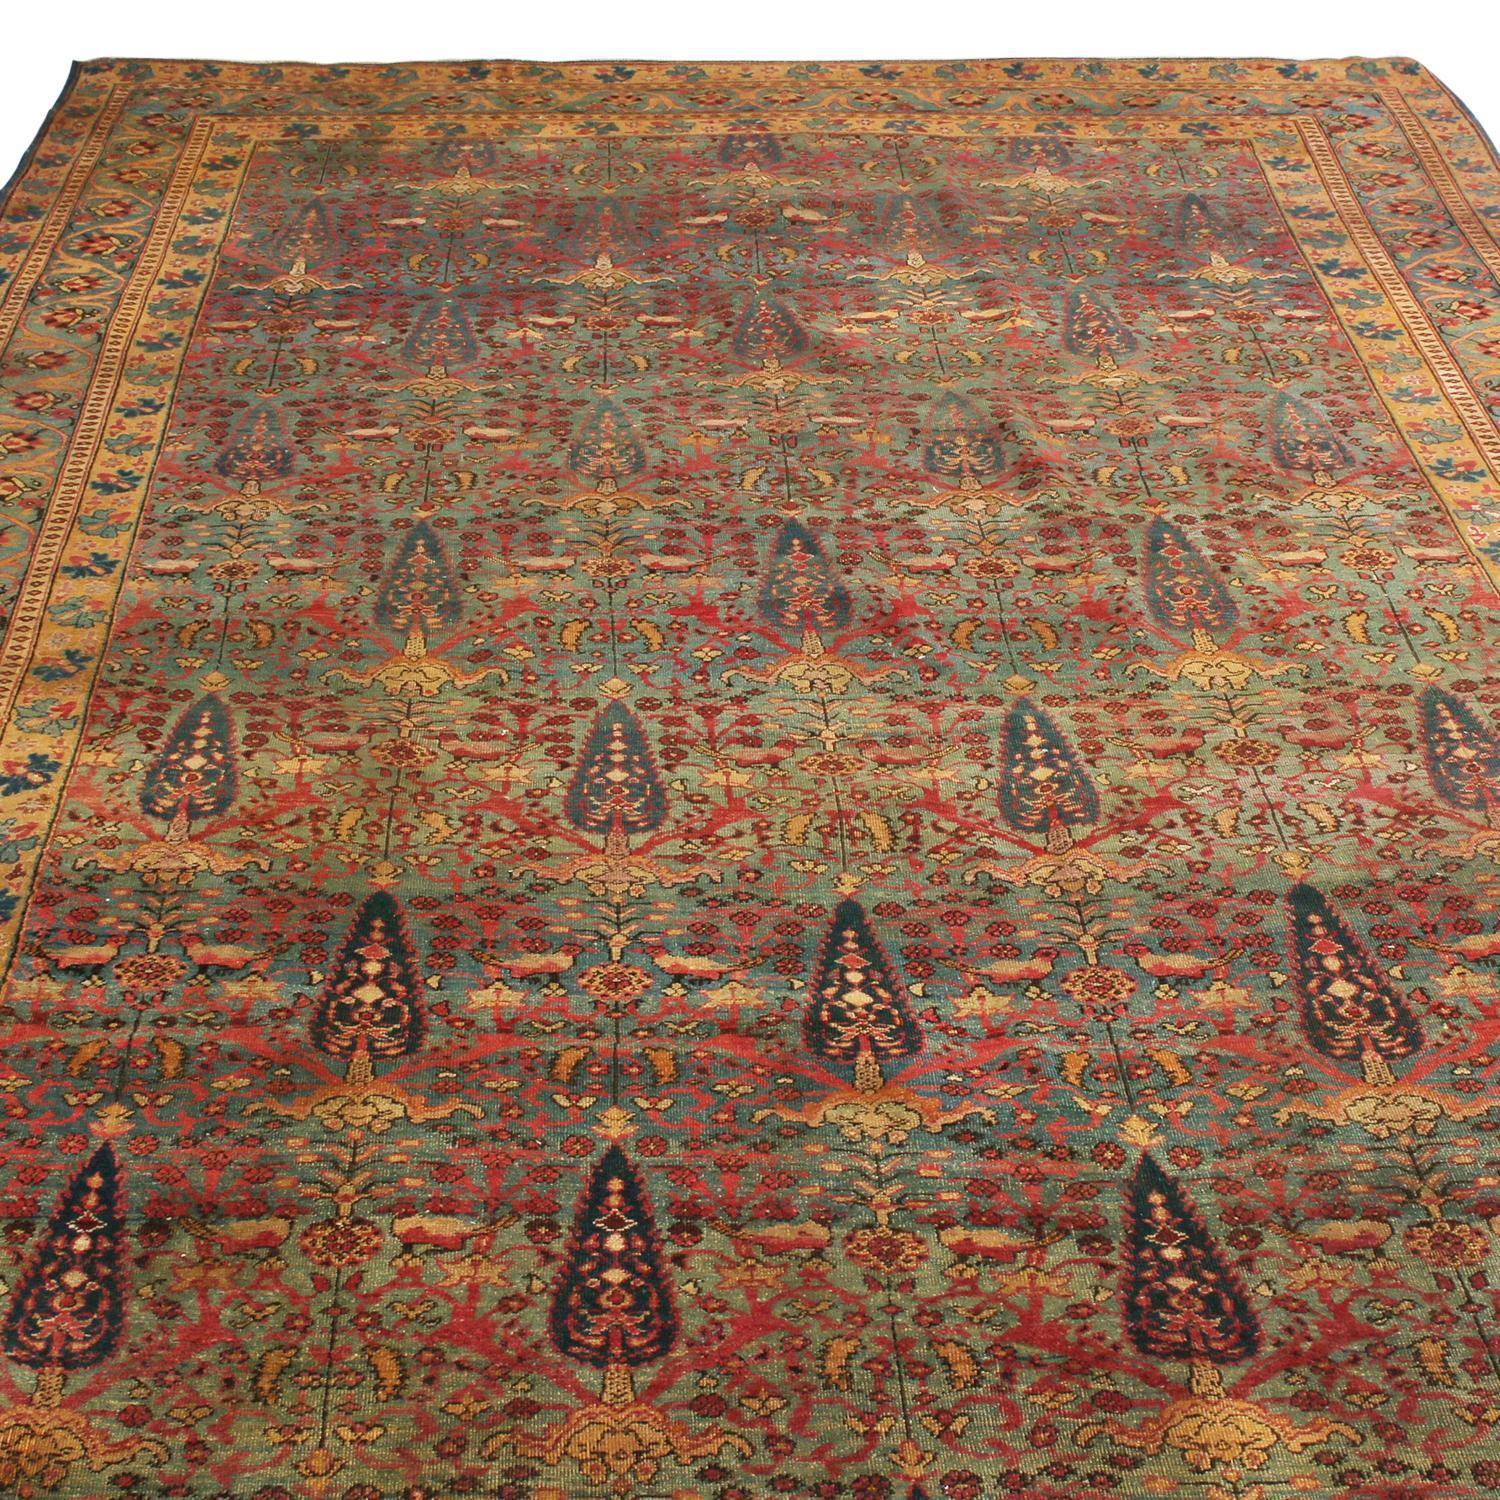 Originating from Persia between 1890-1900, this antique Kerman Lavar Persian rug hails from a distinguished family crafted in one of the most famous provinces of rug making. The field presents a once-acclaimed Persian motif representing the Cypress